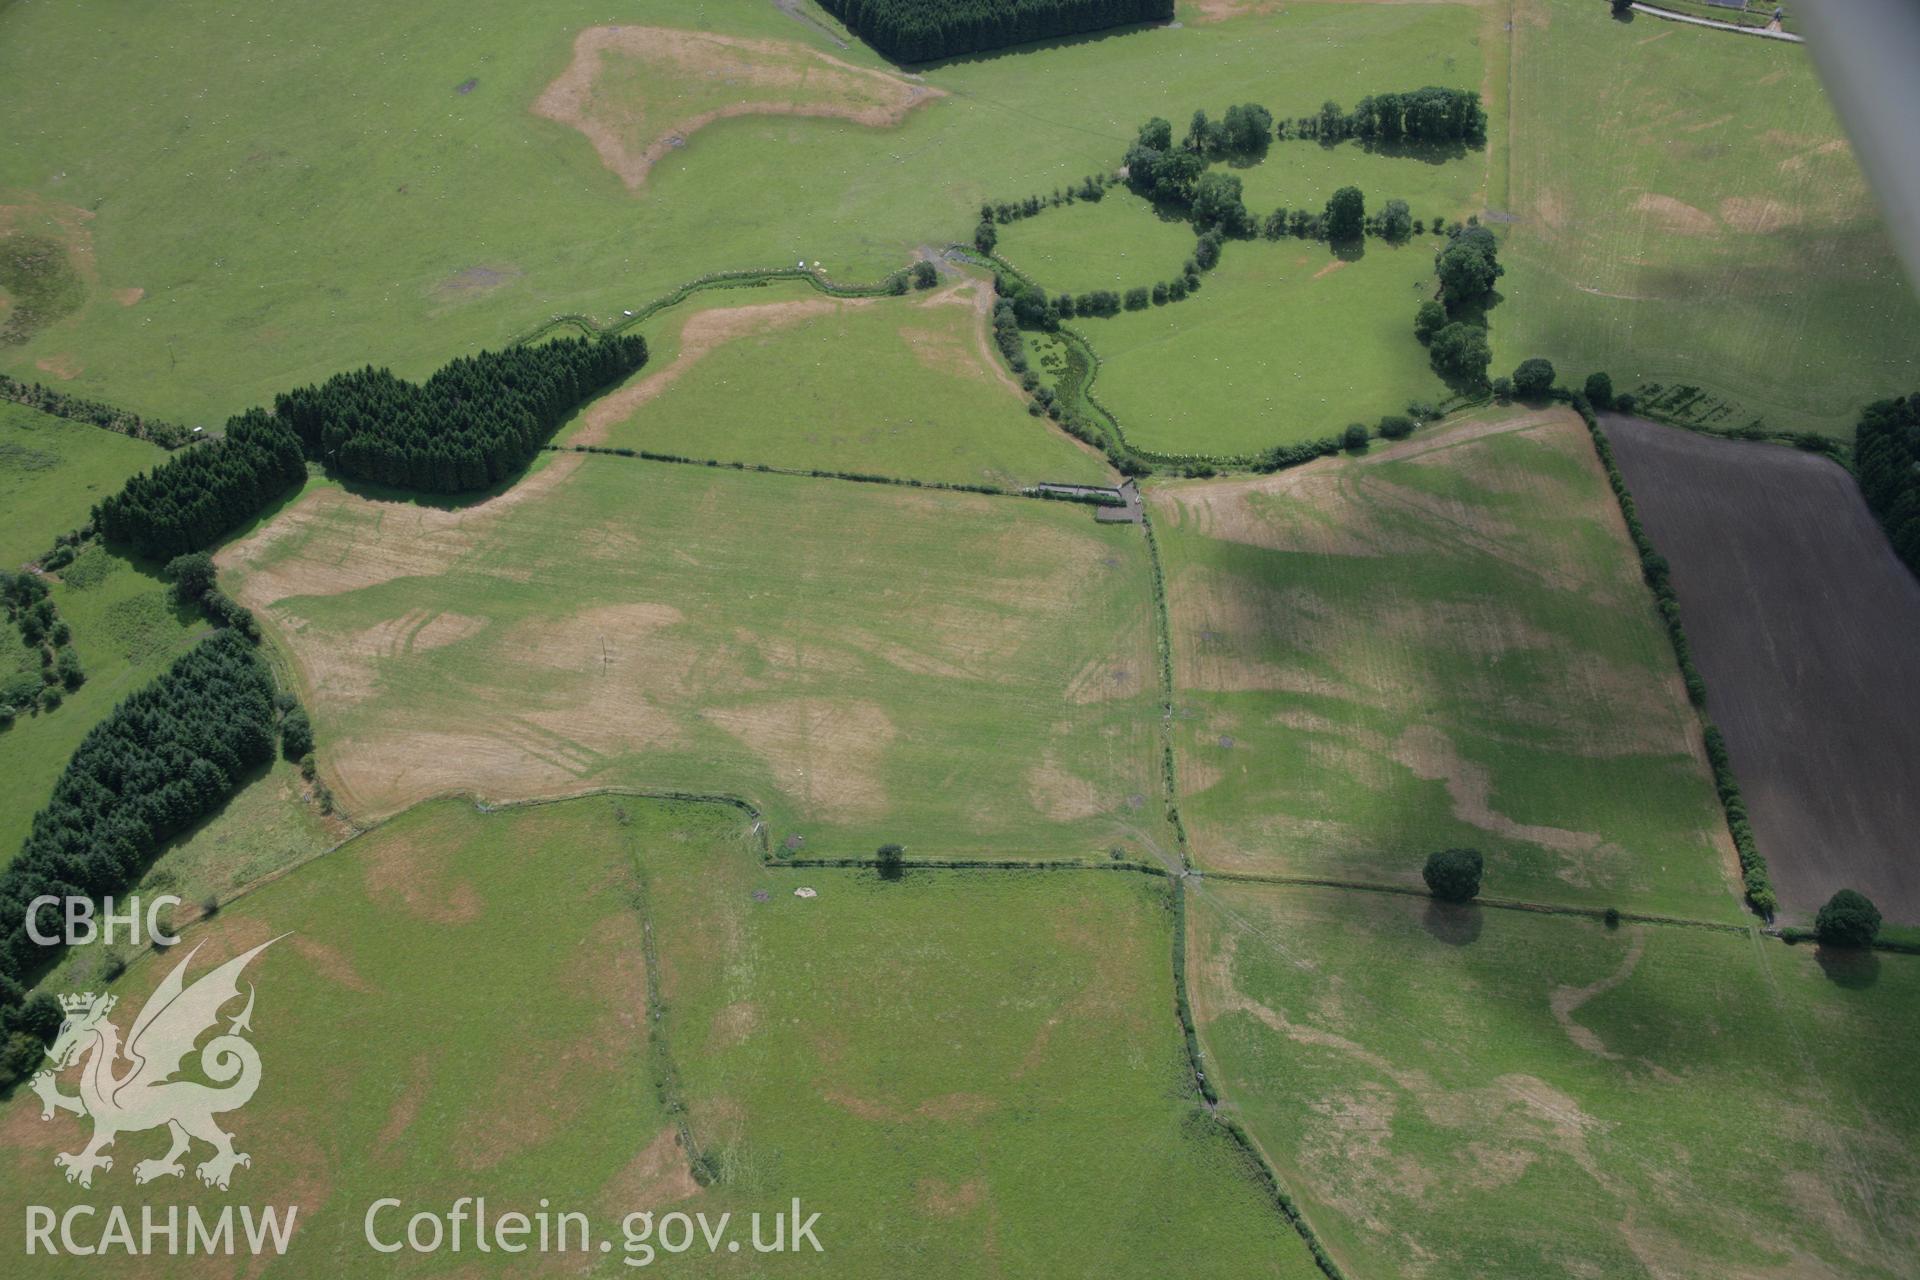 RCAHMW colour oblique aerial photograph of Llanfor Roman Military Complex visible in cropmarks, viewed from the north-east. Taken on 31 July 2006 by Toby Driver.